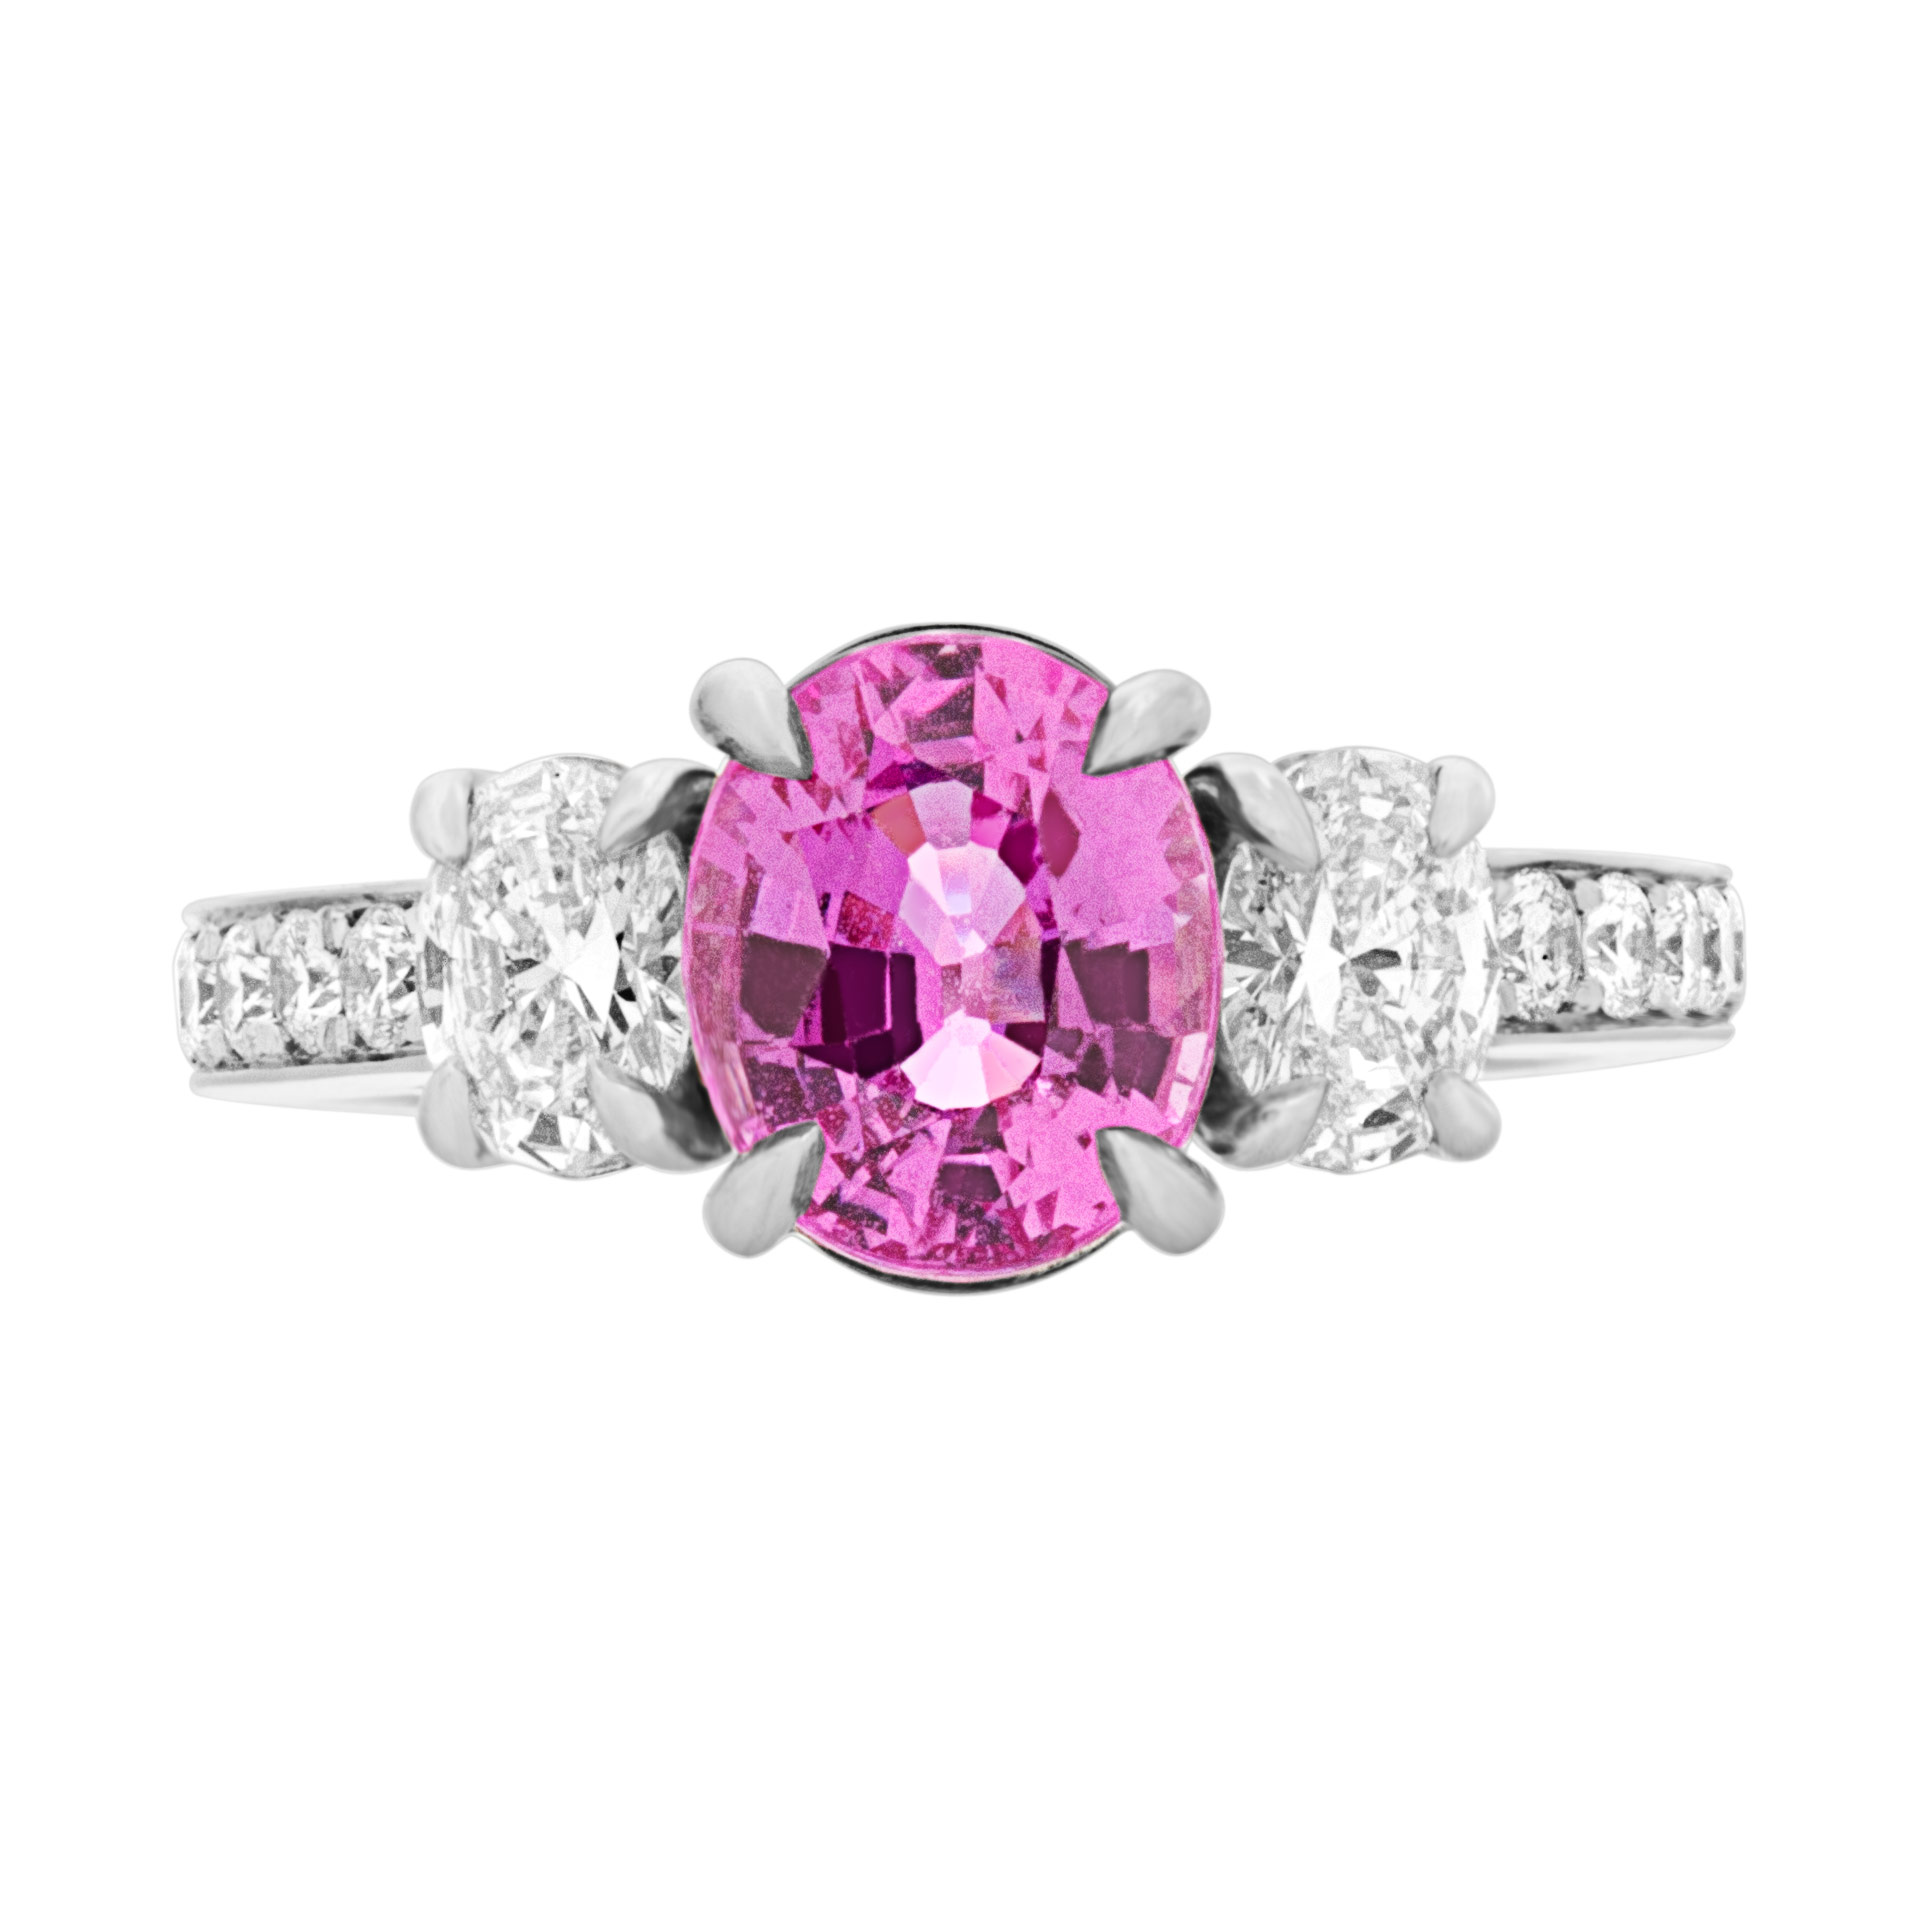 Madagascar Pink sapphire (2.20 cts) set in platinum with diamond accents